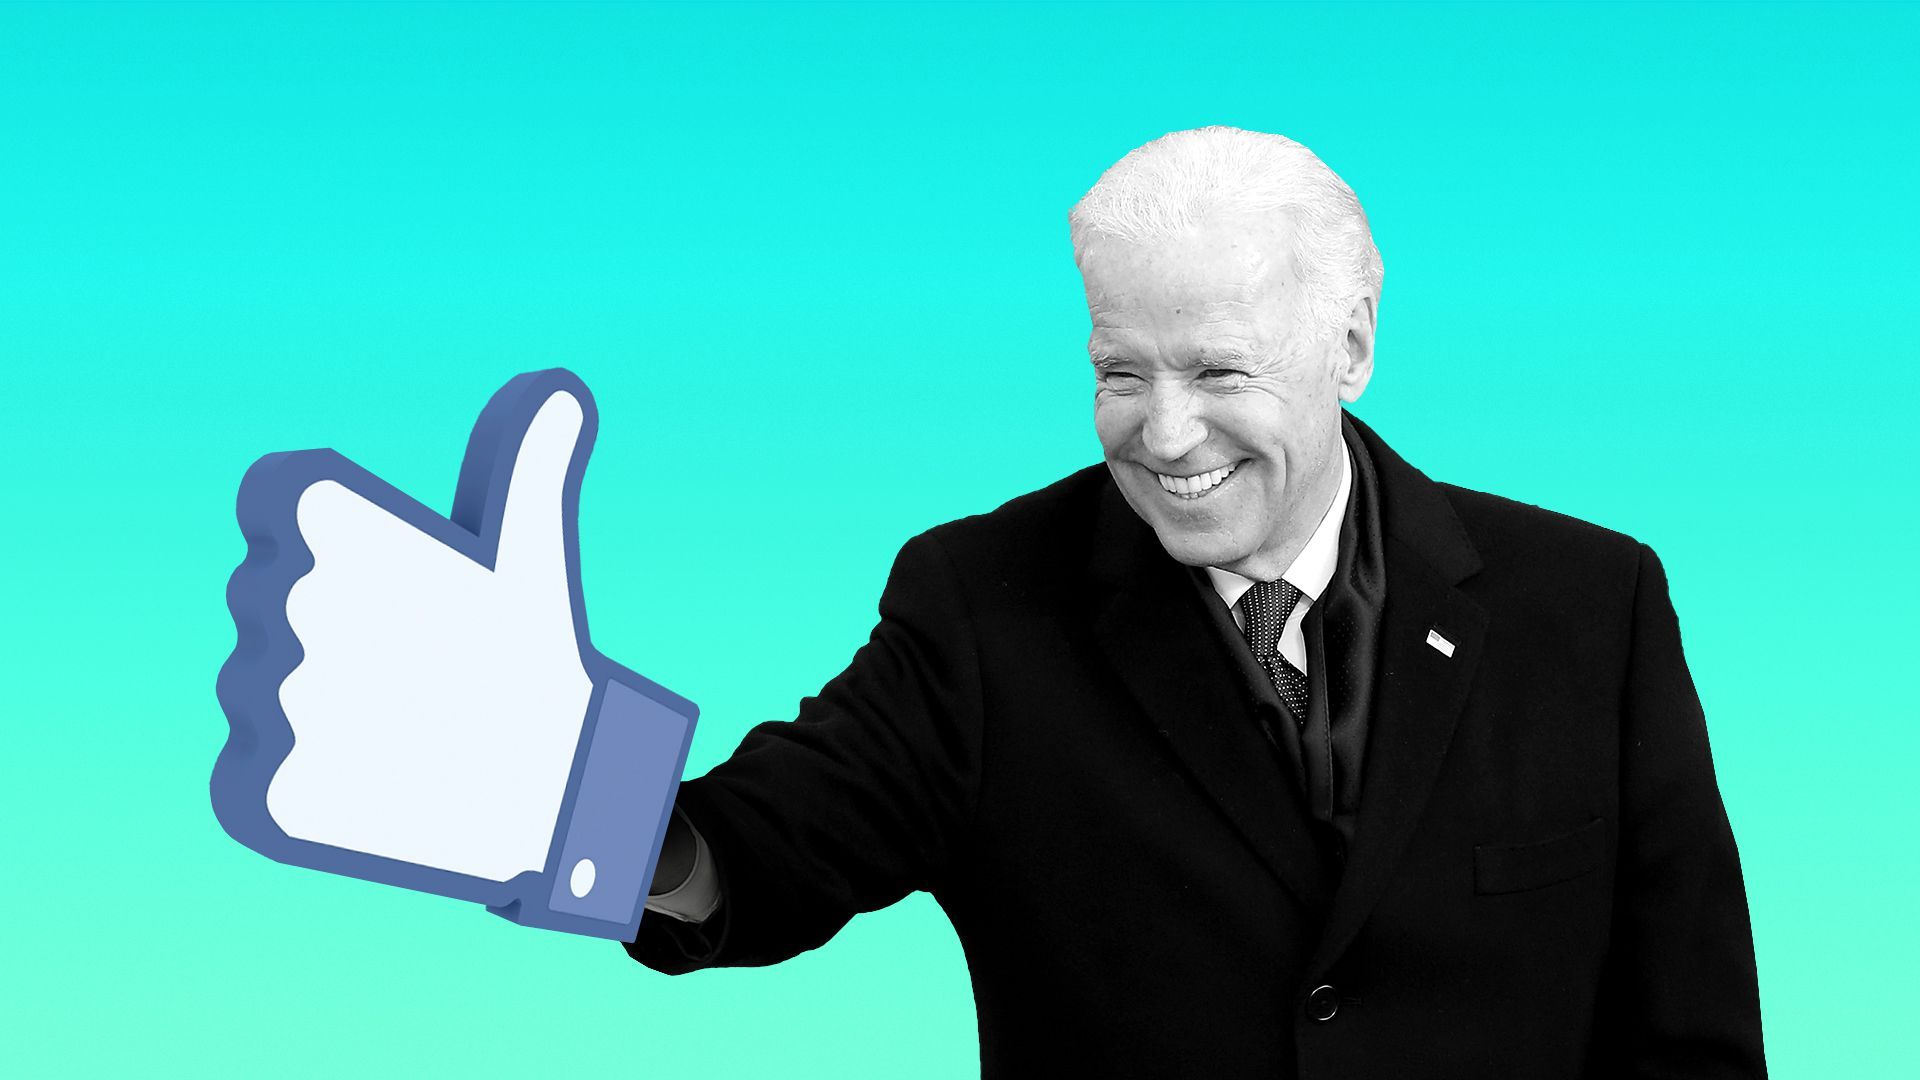 Photo illustration of President Biden with a Facebook thumbs up in place of his hand